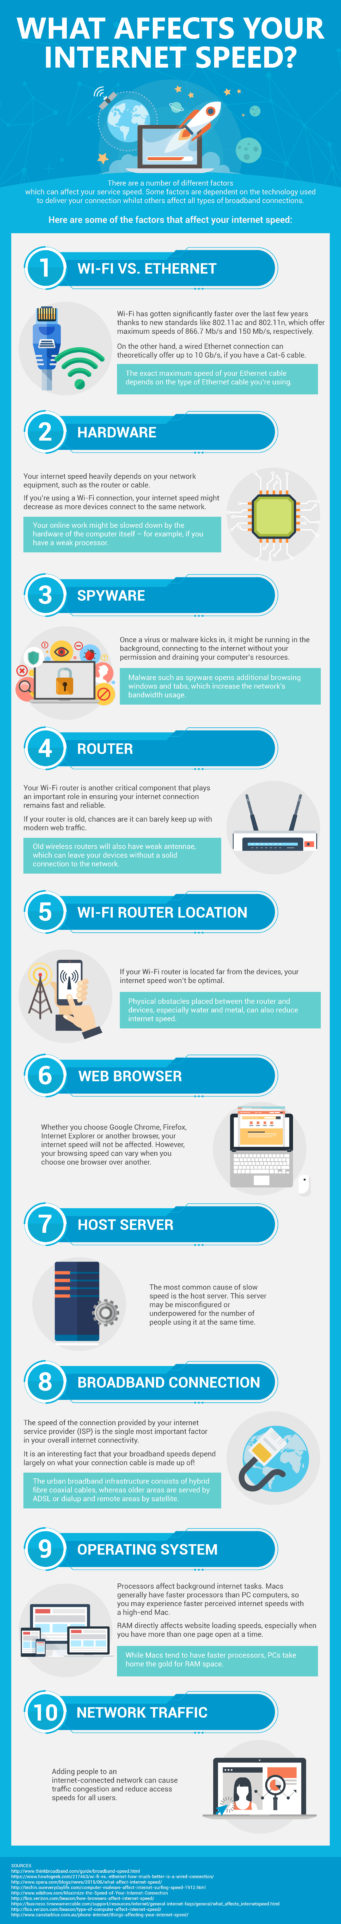 Factors That Affect Your Internet Speed Infographic